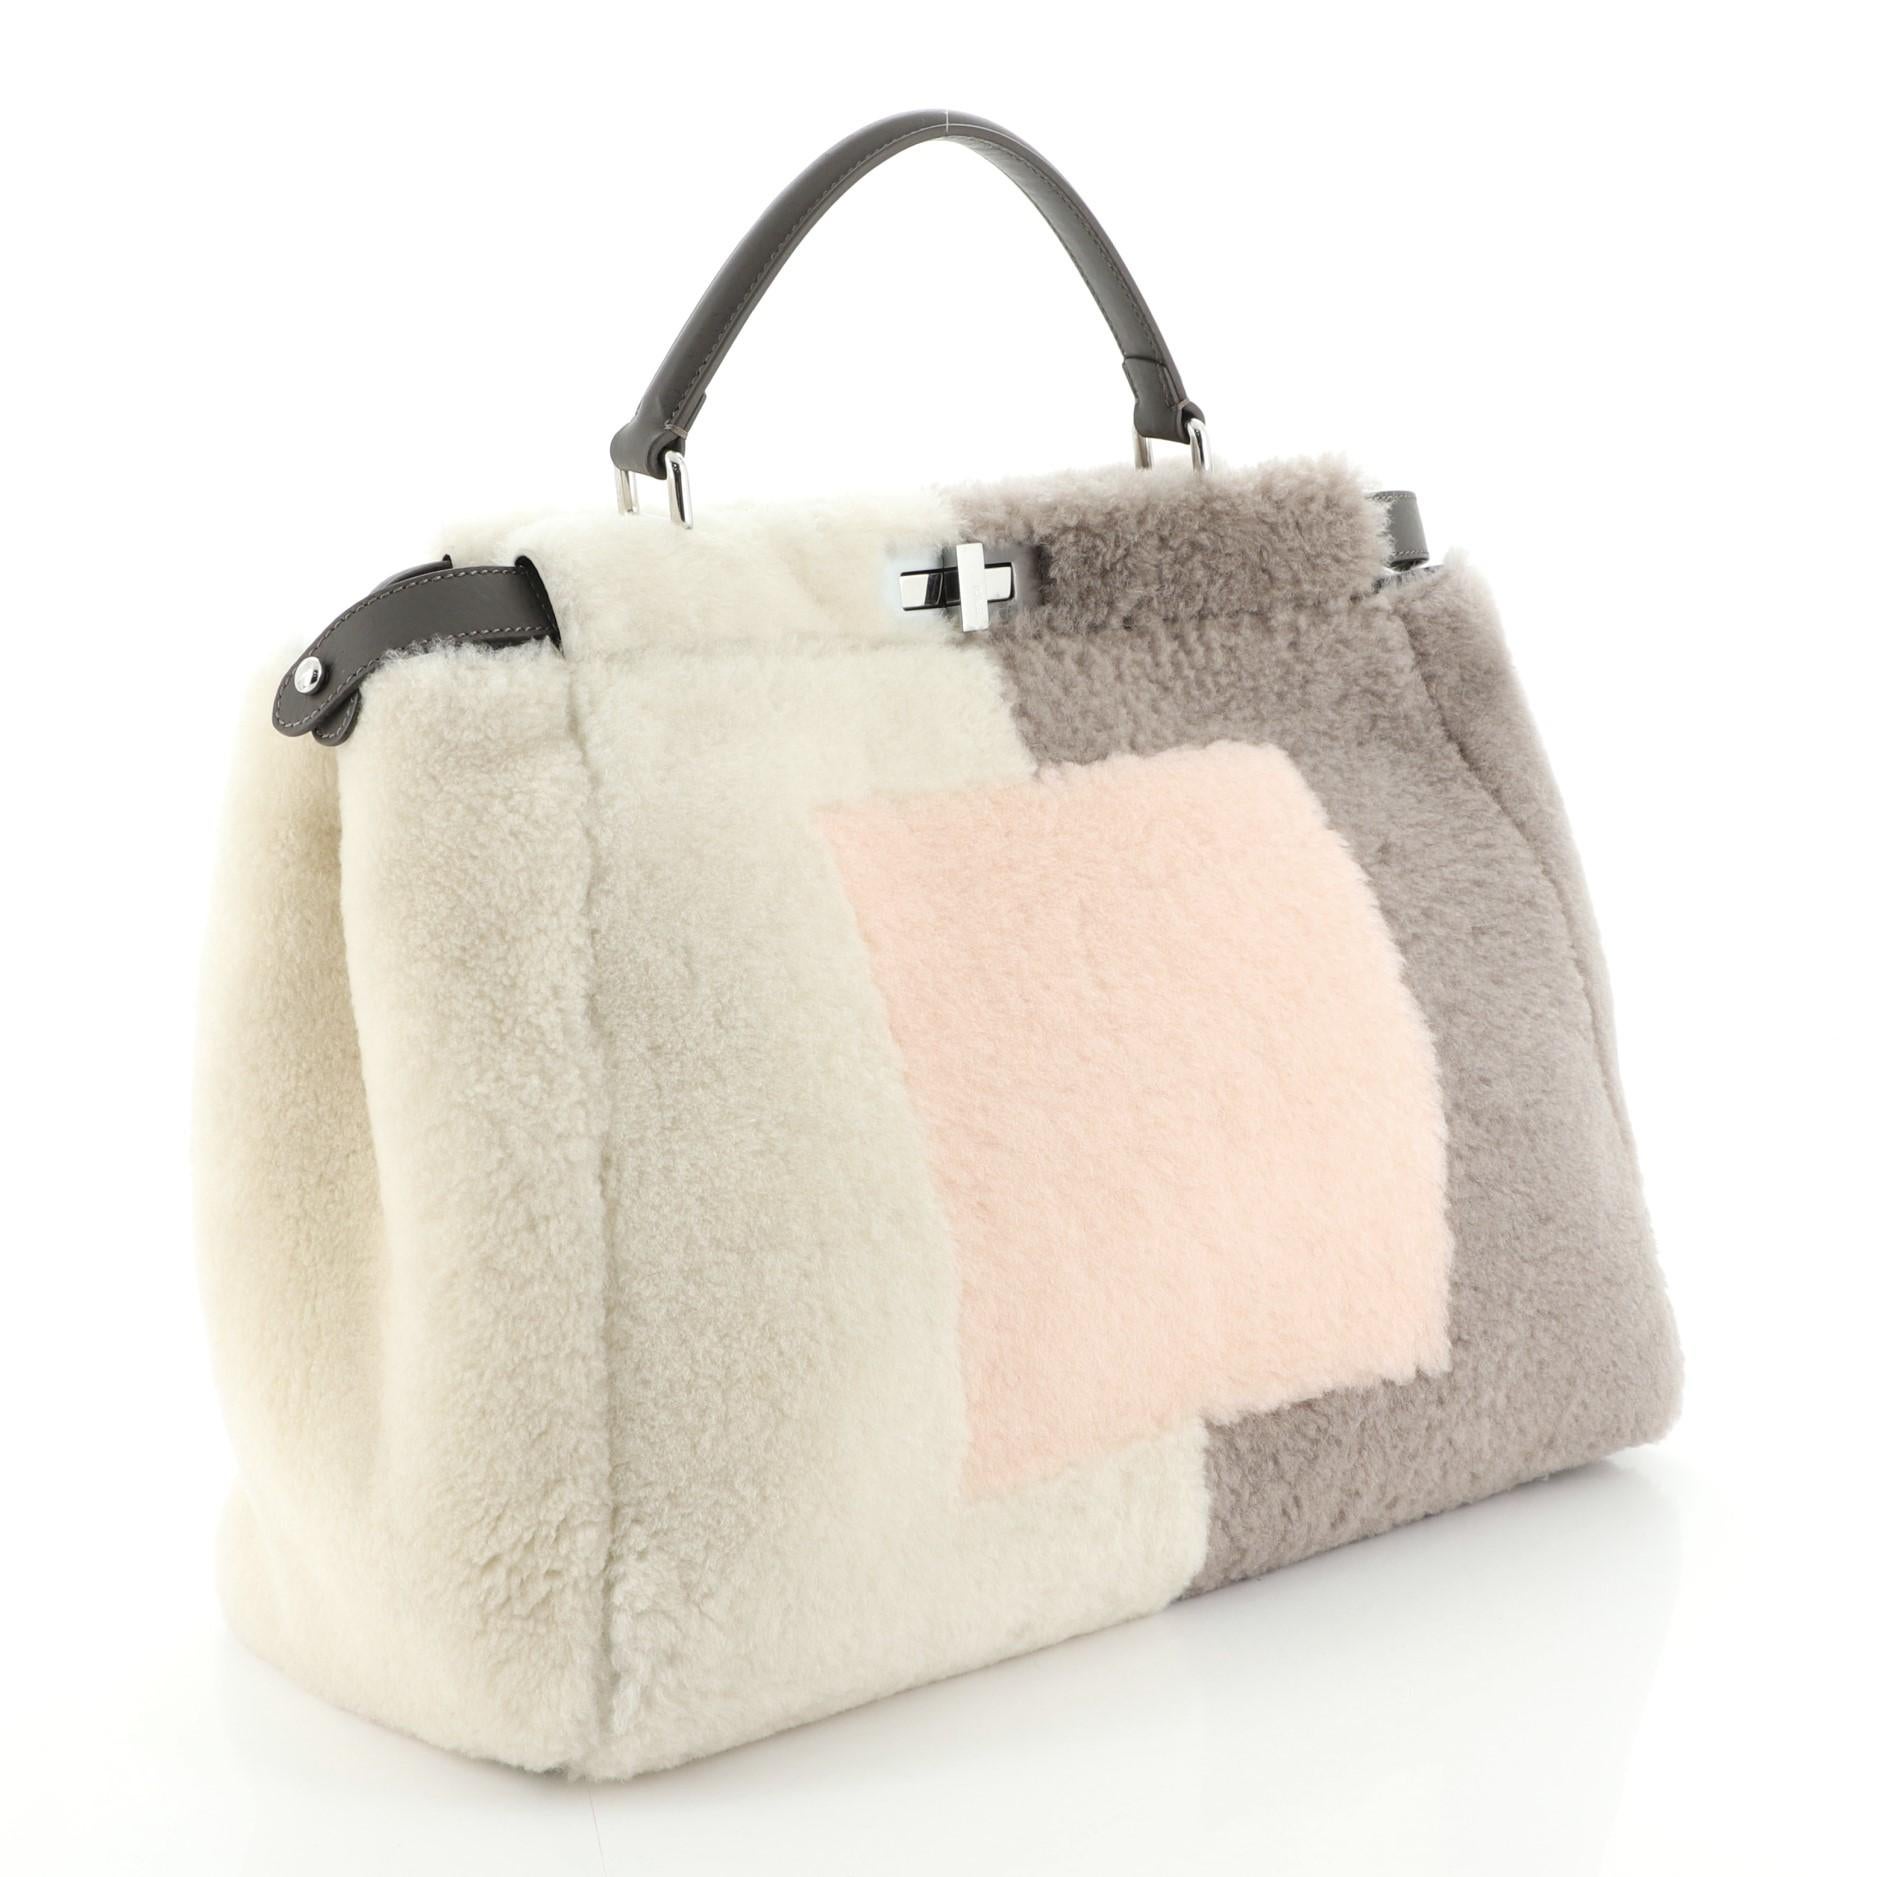 Estimated Retail Price: $3,250
Condition: Very good. Loss of shape on exterior, minor wear on handle, scratches on hardware. 
Accessories: With Strap 
Measurements: 
Designer: Fendi
Model: Peekaboo Bag Shearling Large
Exterior Material: Shearling